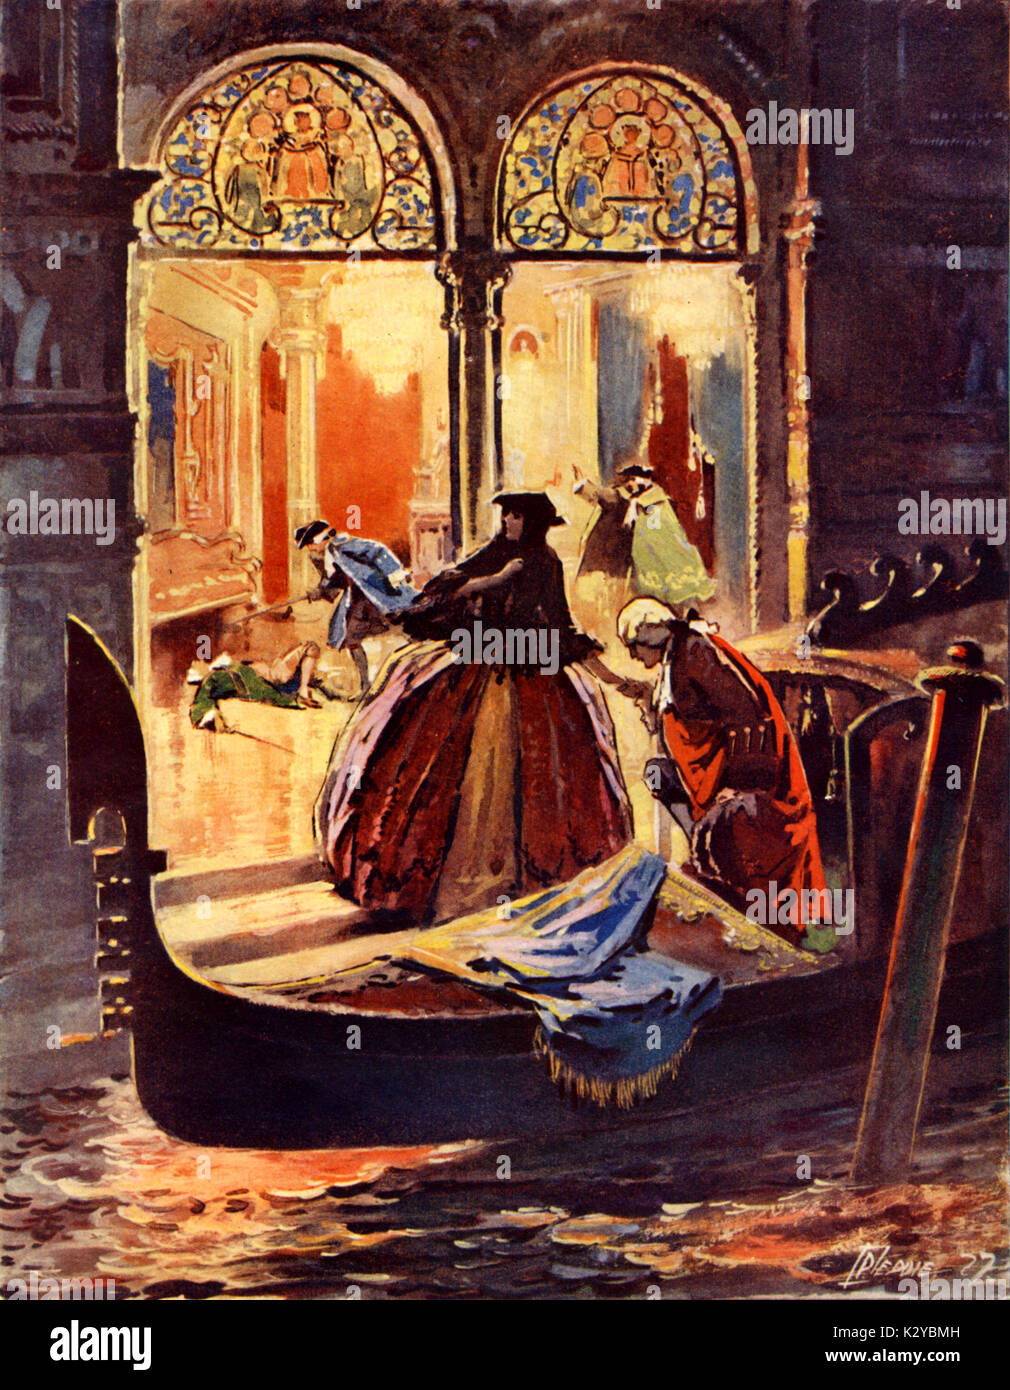 Offenbach, Jacques   Tales of Hoffmann. Conclusion of tale set in Venice. Hoffmann sees Pitichinaccio handing Giulietta into a gondola. Dapetutto picks up sword which Hoffman dropped after killing Schlemil.  German/French Composer (1819-1880) Stock Photo